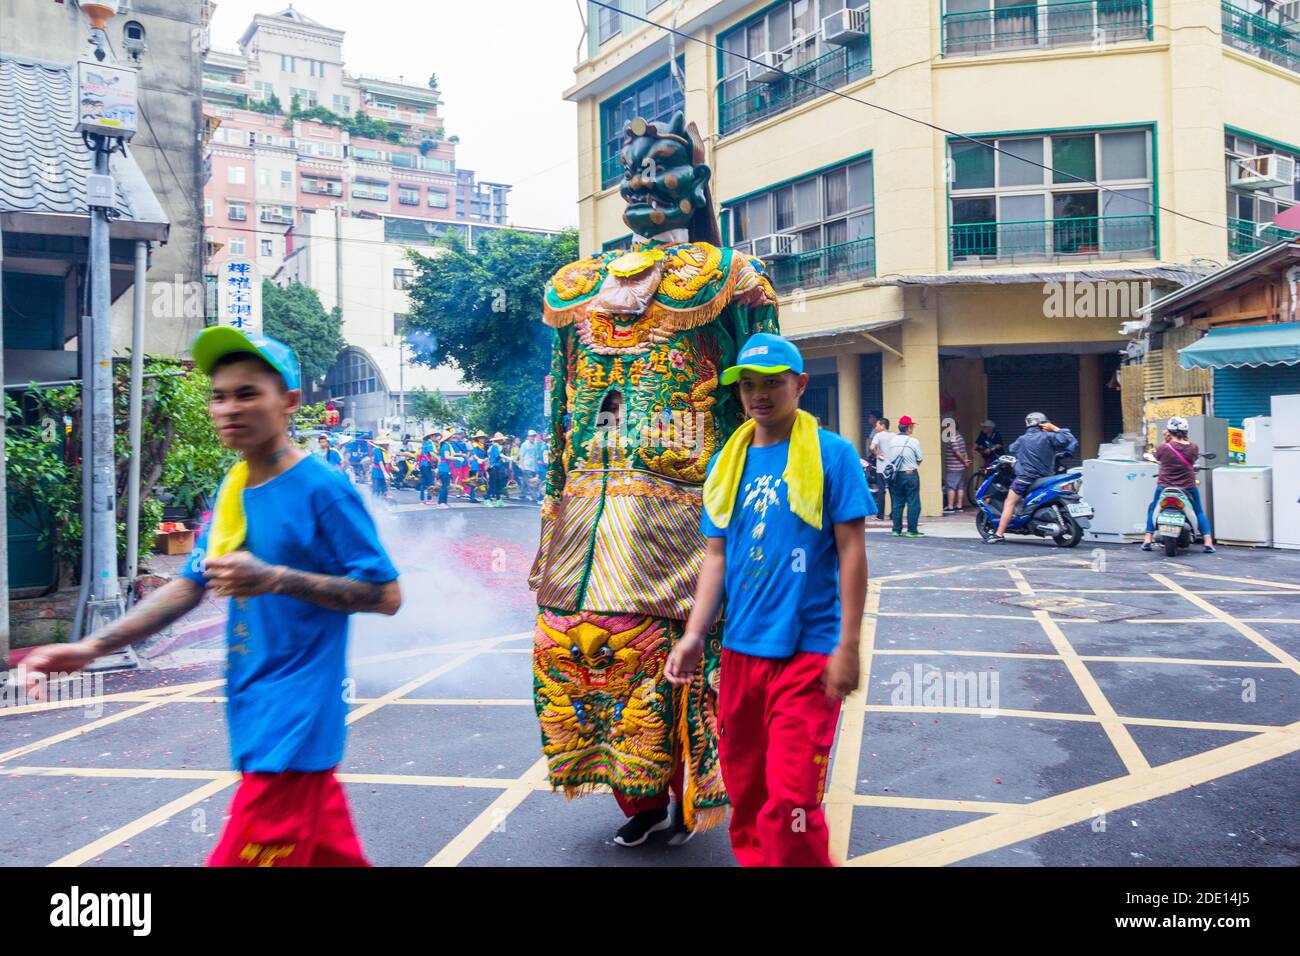 A religious parade during the Bao Sheng Cultural Festival that celebrates the birth of Bao Sheng at the Bao'an Temple in Taipei, Taiwan Stock Photo